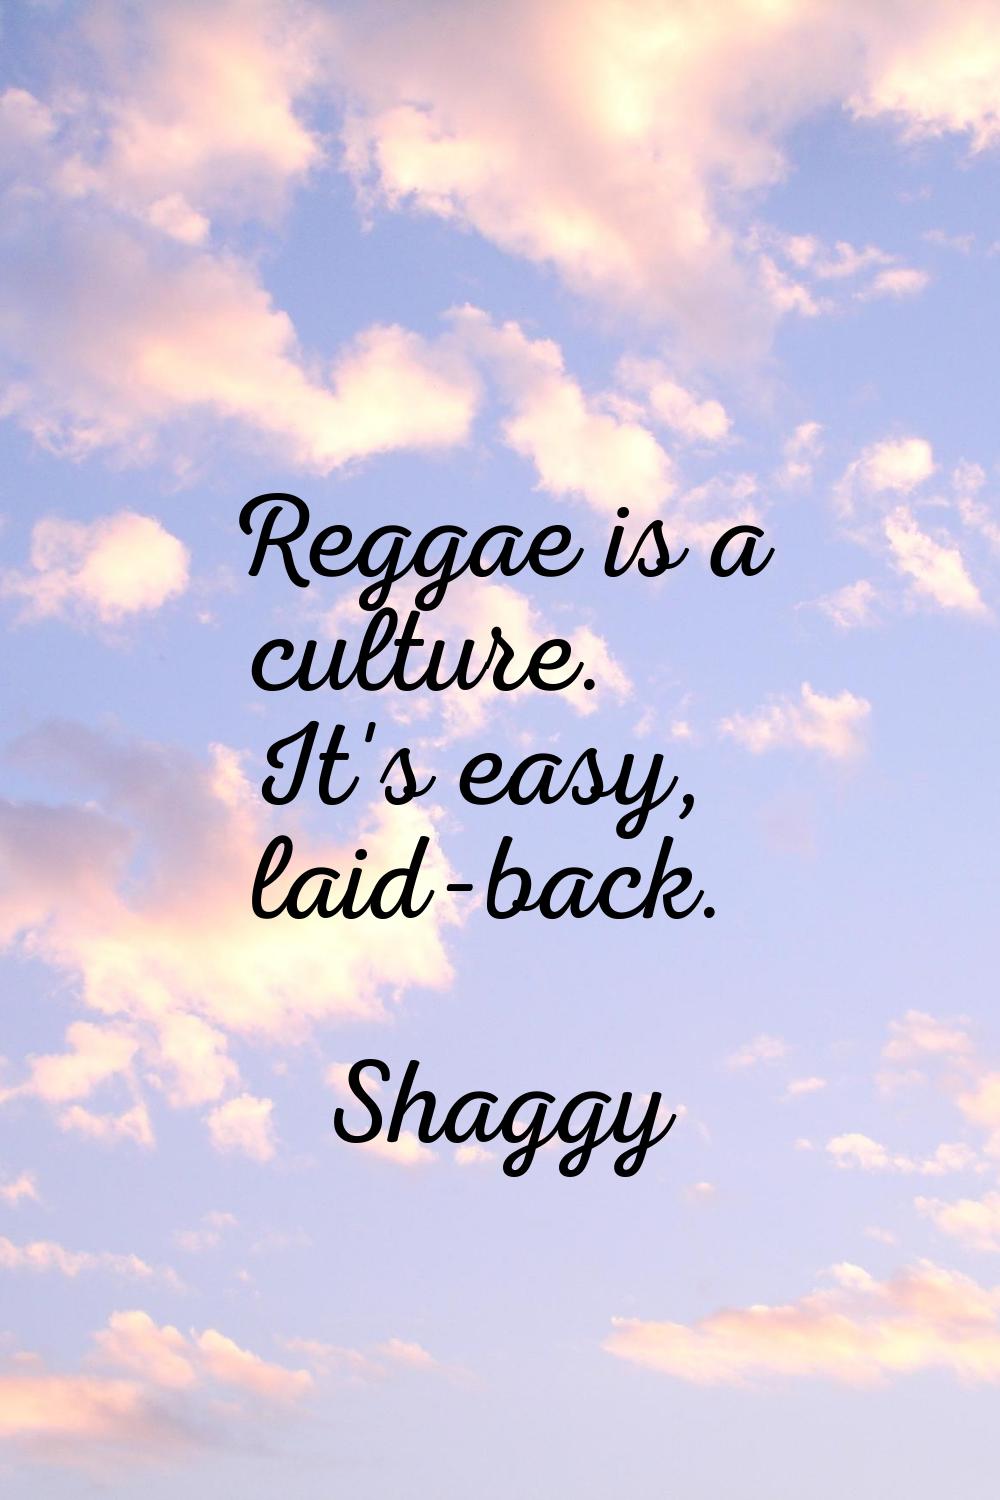 Reggae is a culture. It's easy, laid-back.